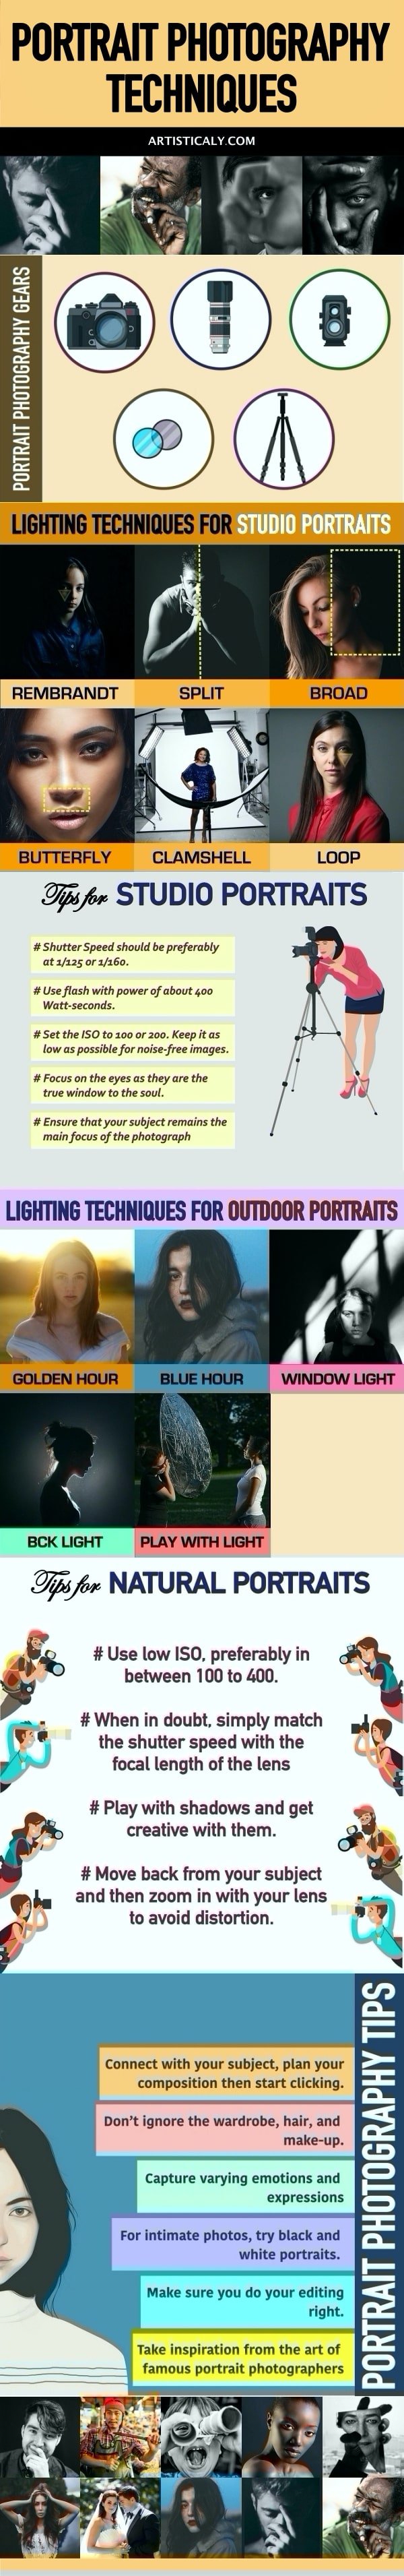 A Complete Handbook and Guide to Portrait Photography Techniques